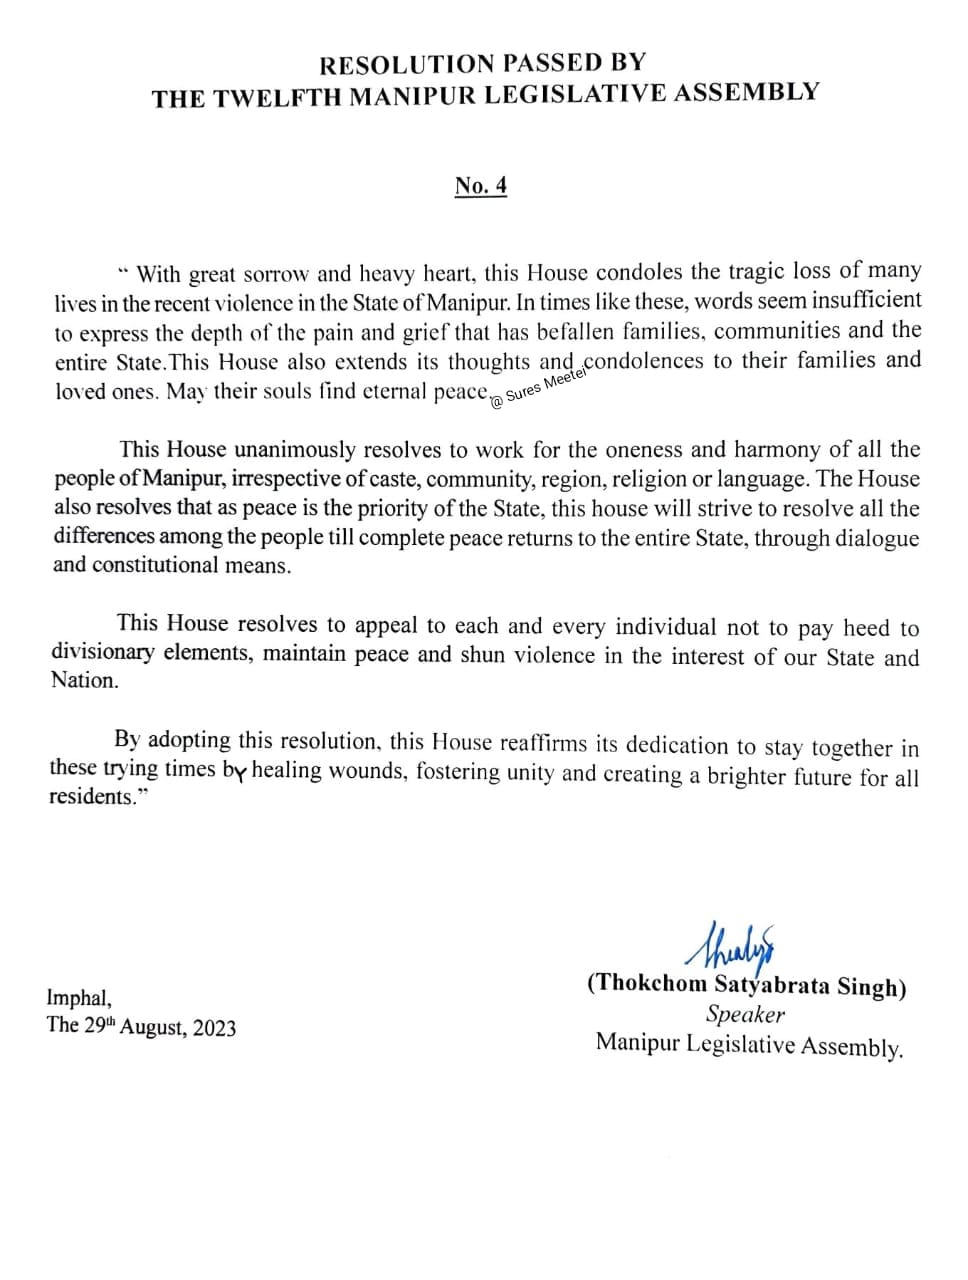 Manipur Assembly session adjourned